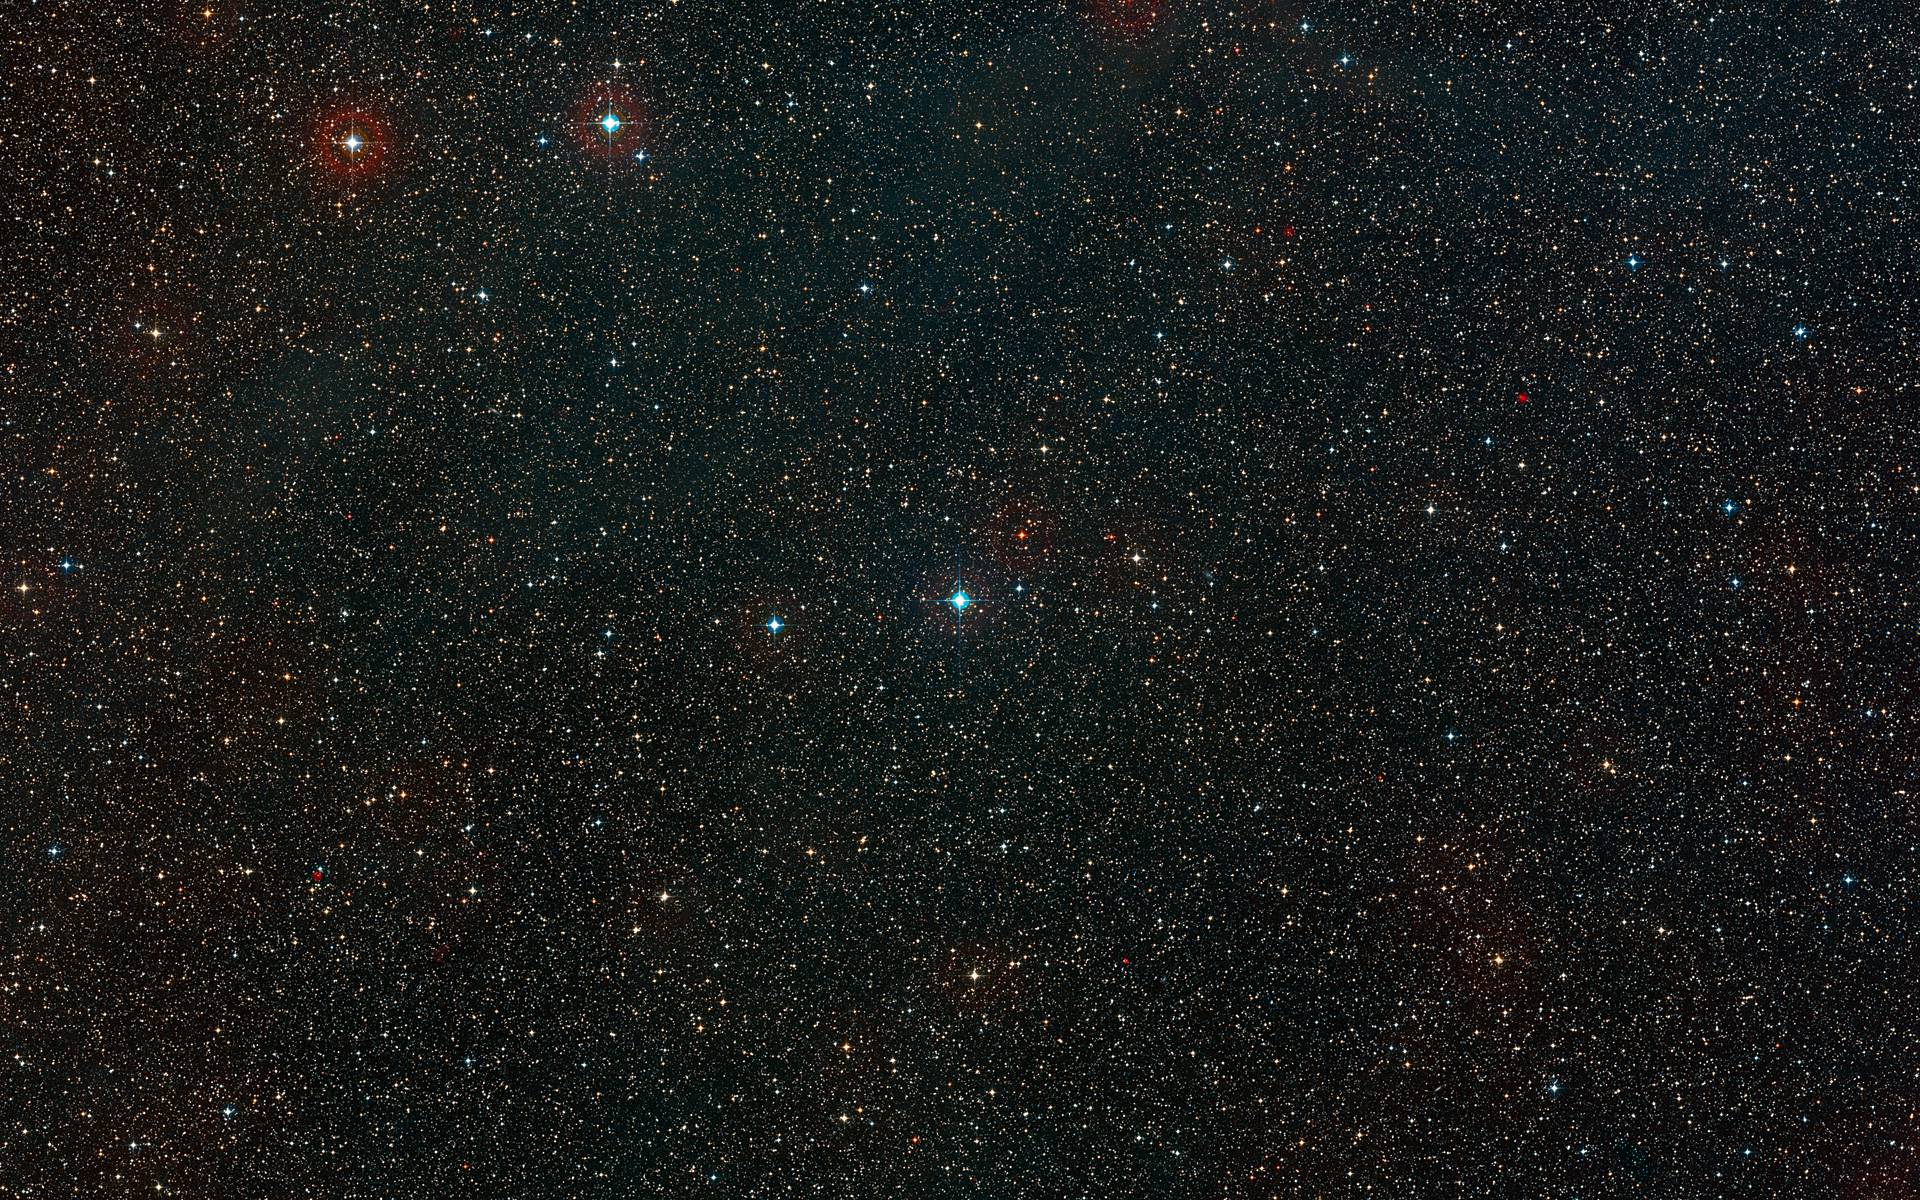 Wide Field View Of The Sky Around The Young Star HD 100546